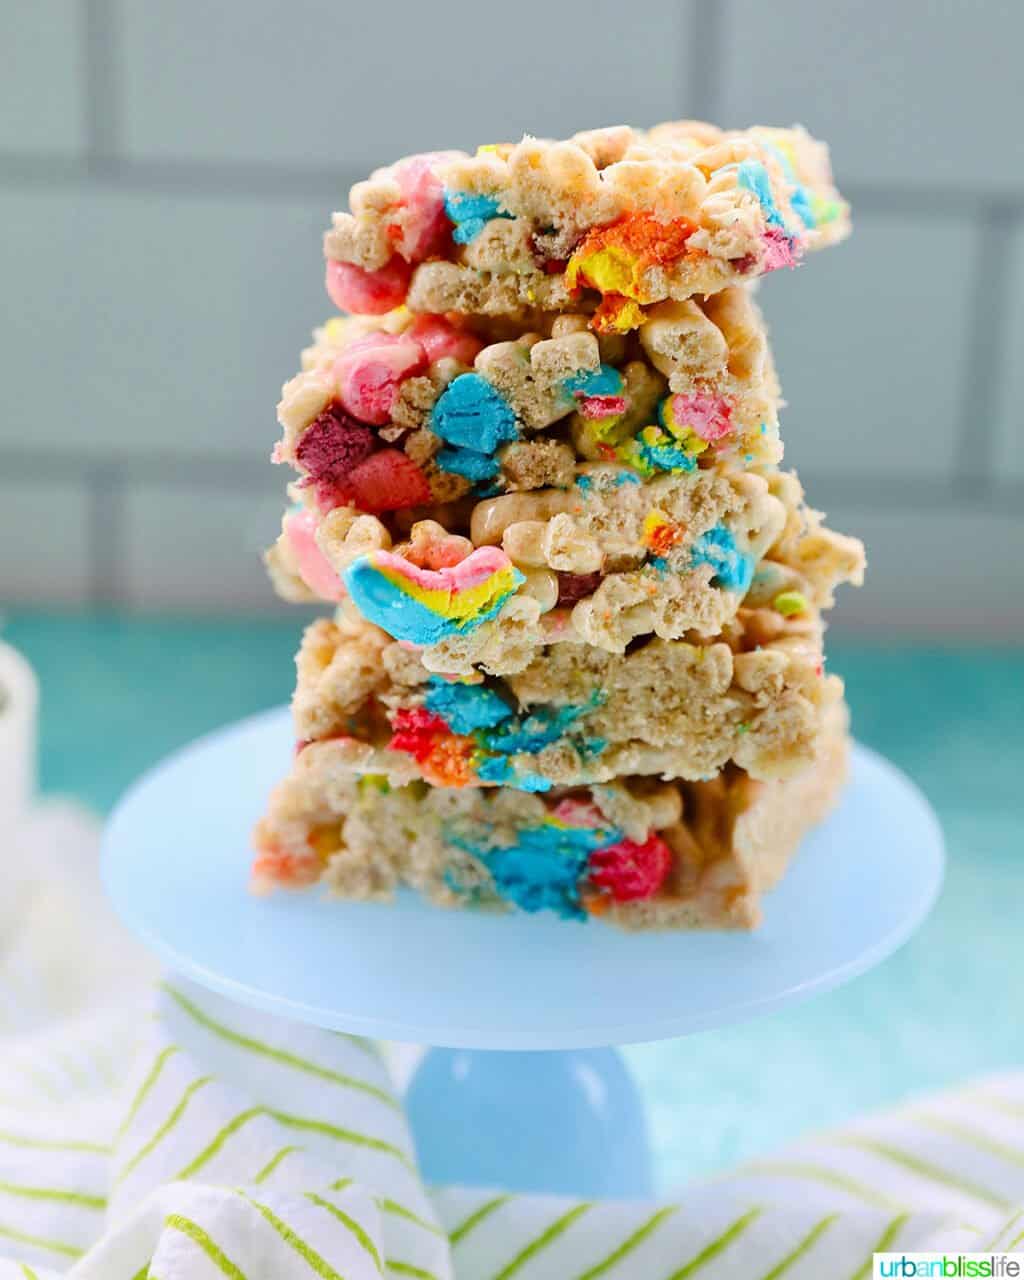 lucky charms cereal bars stacked on blue plate